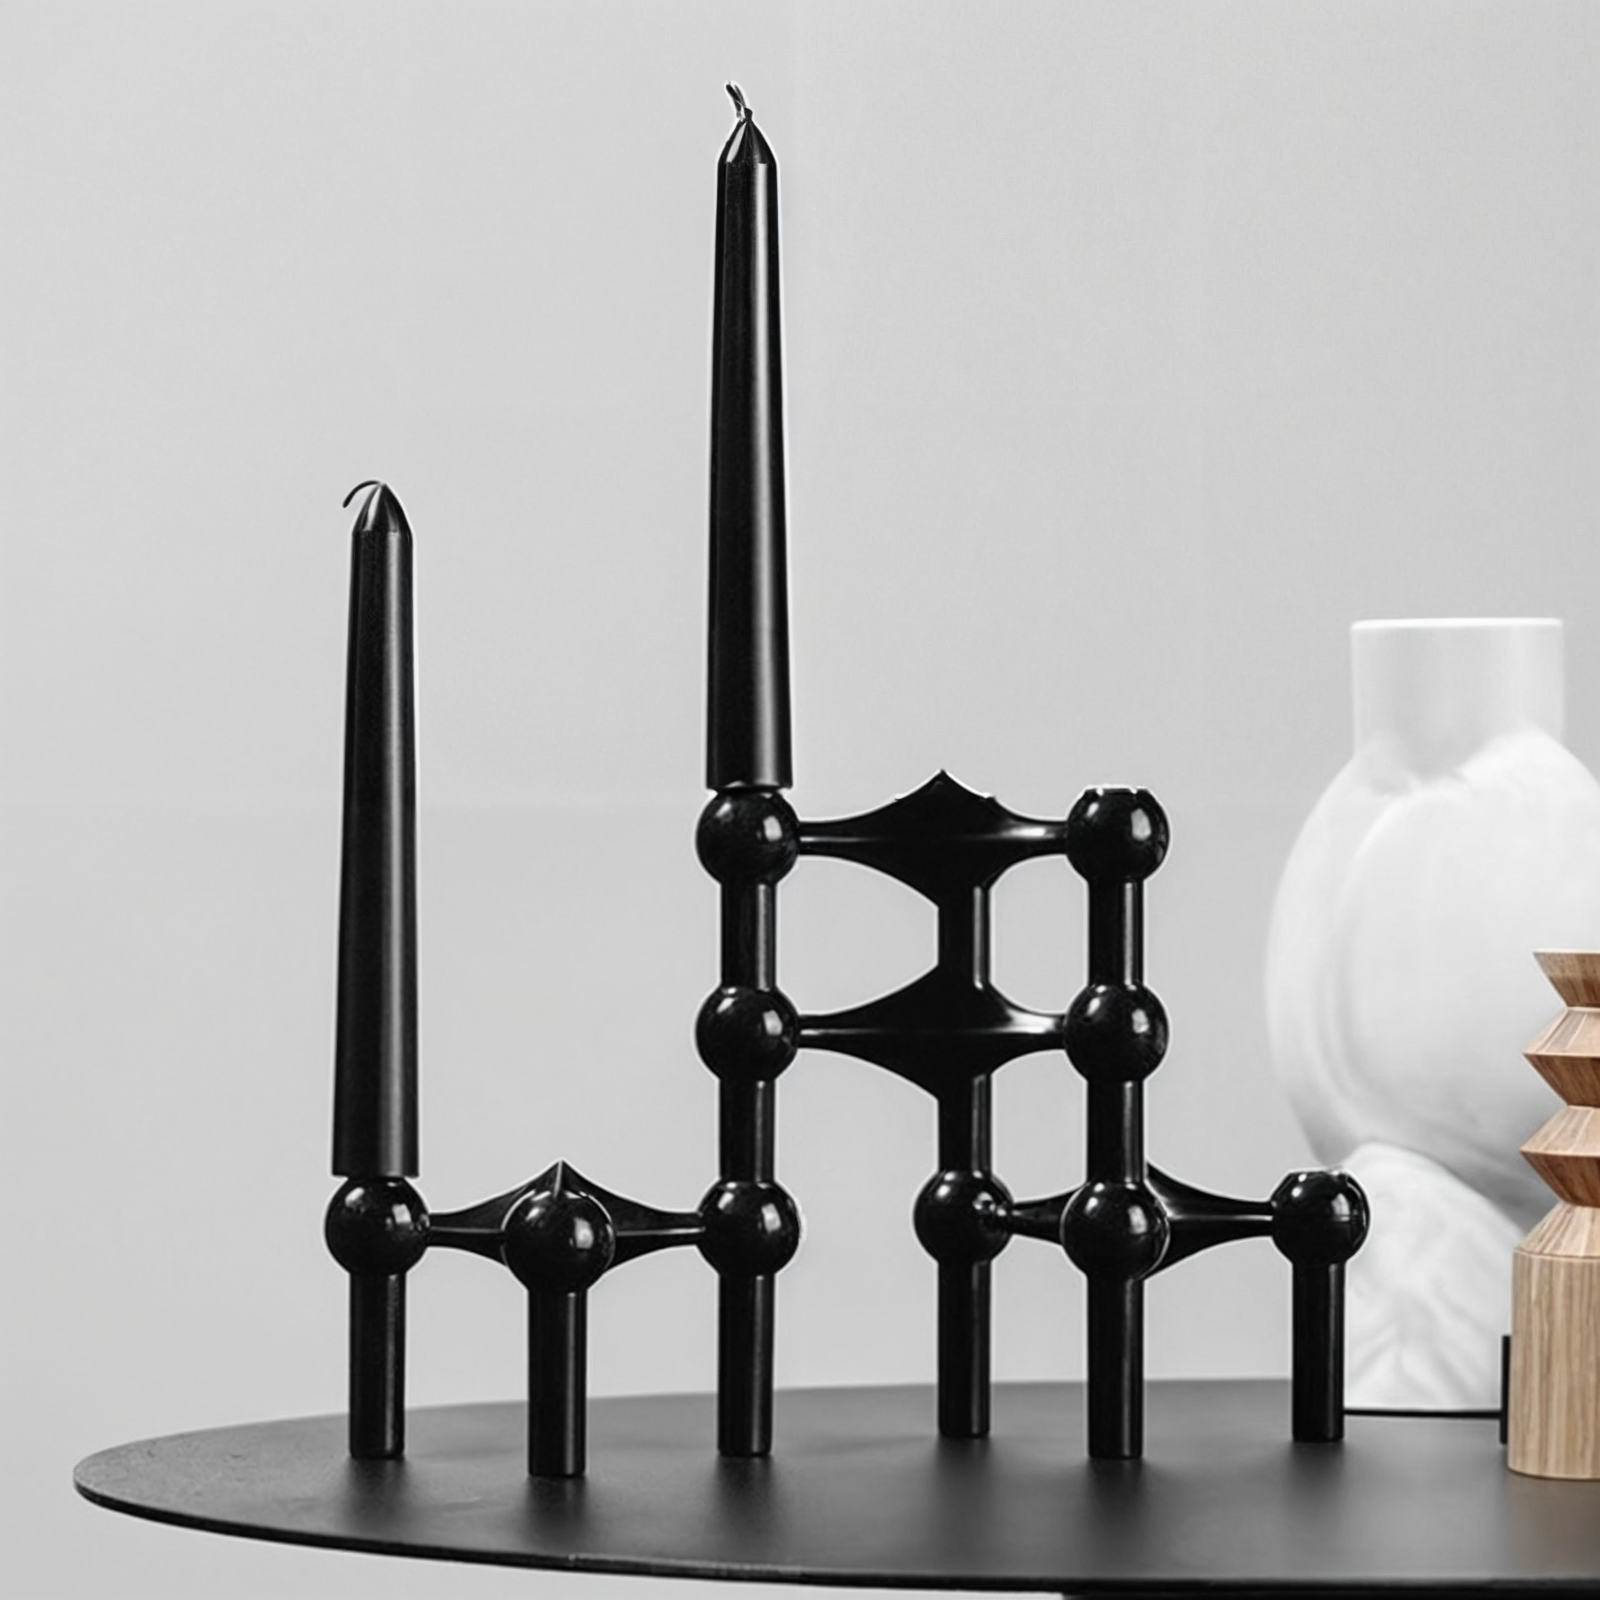 The Modern Candle Holder